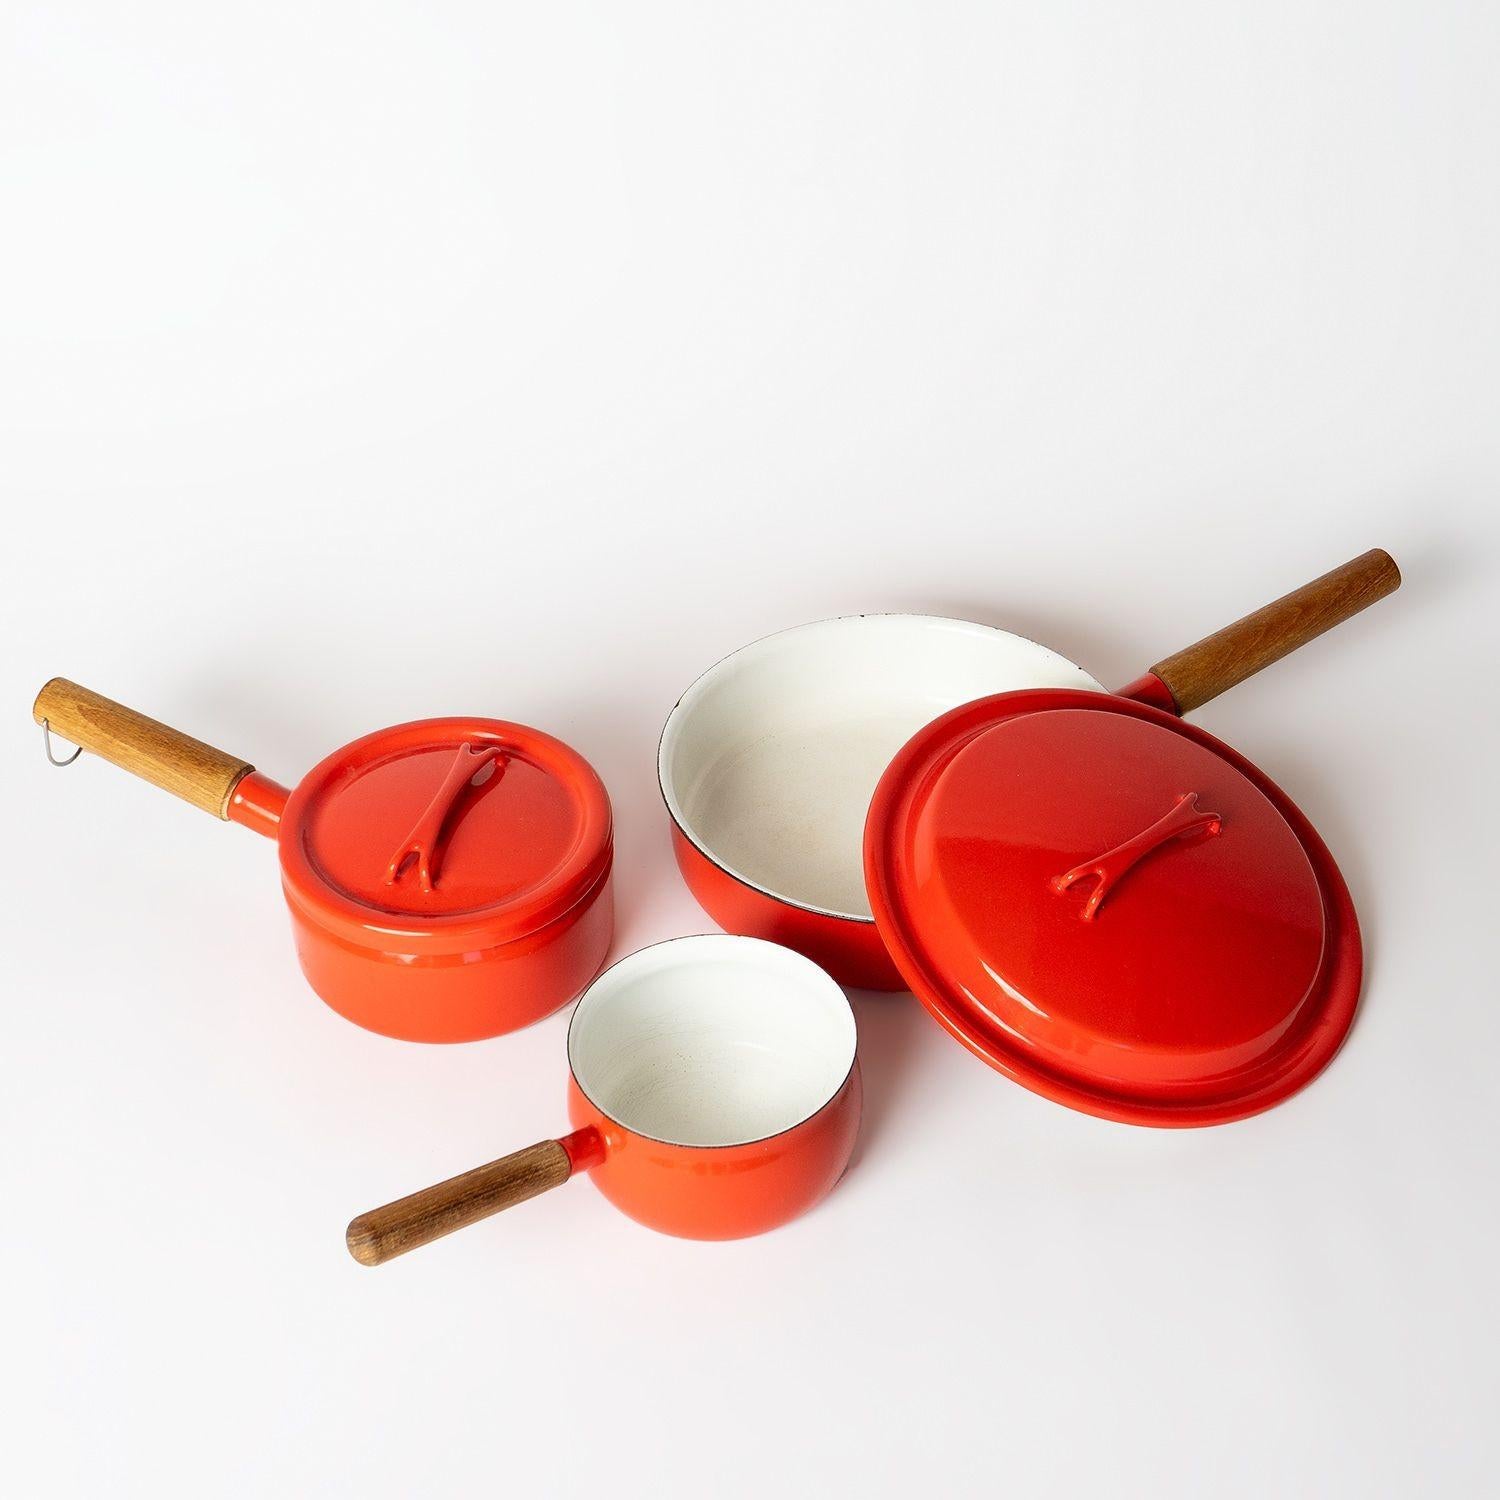 Vintage Mid-Century Scandinavian Cookware

A matching set of three saucepans. One large diameter shallow pan with lid. One medium-sized saucepan with a lid and a smaller saucepan (designed without a lid). All in red enamel with white enamel